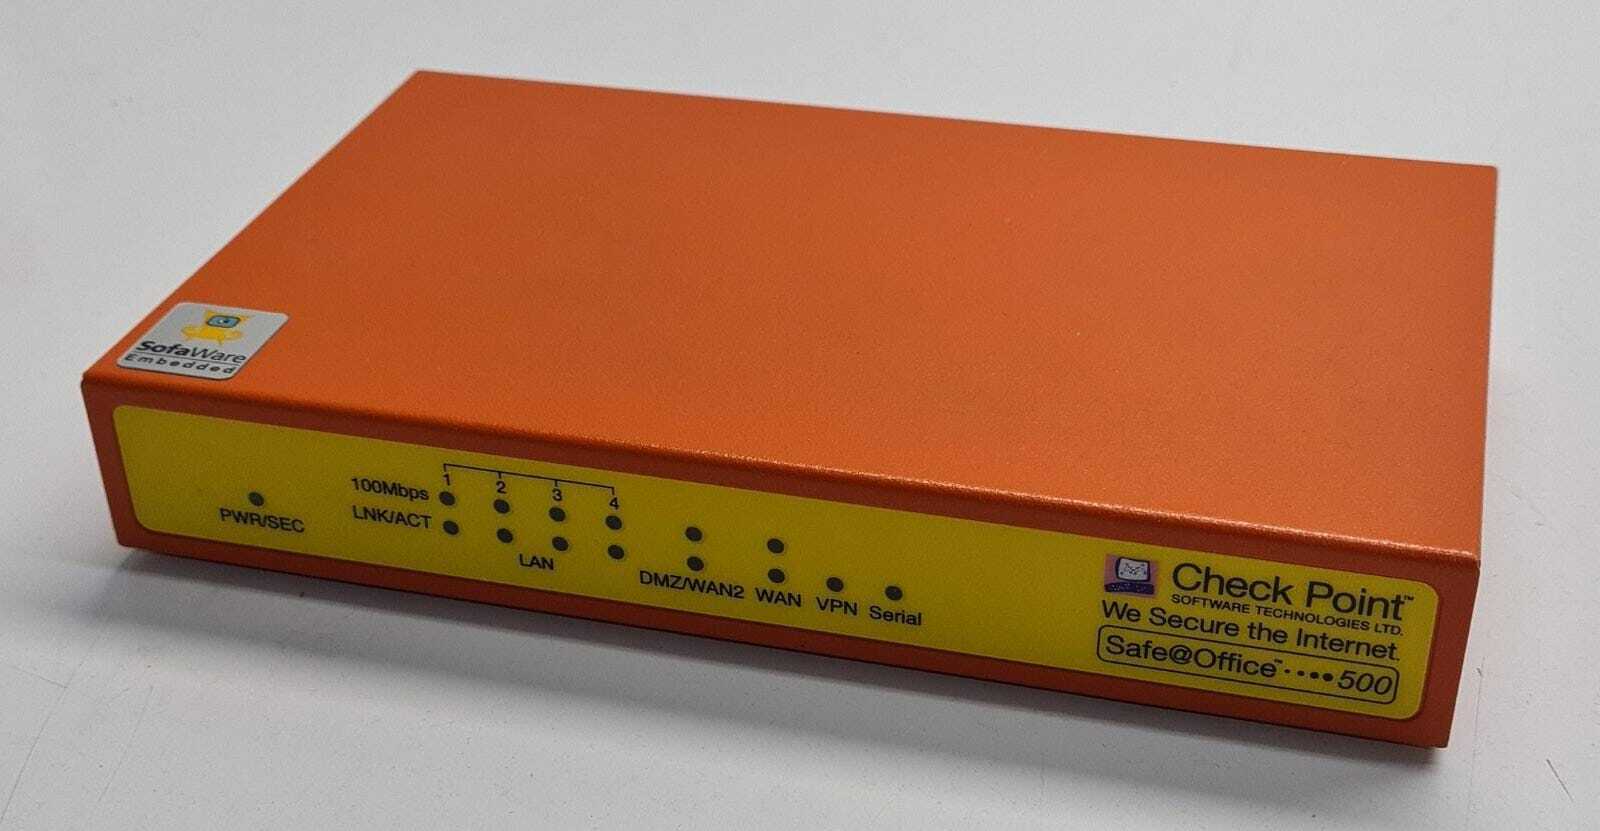 Check Point Safe@Office 500 Series Firewall Router Security SBX-166LHGE VPN